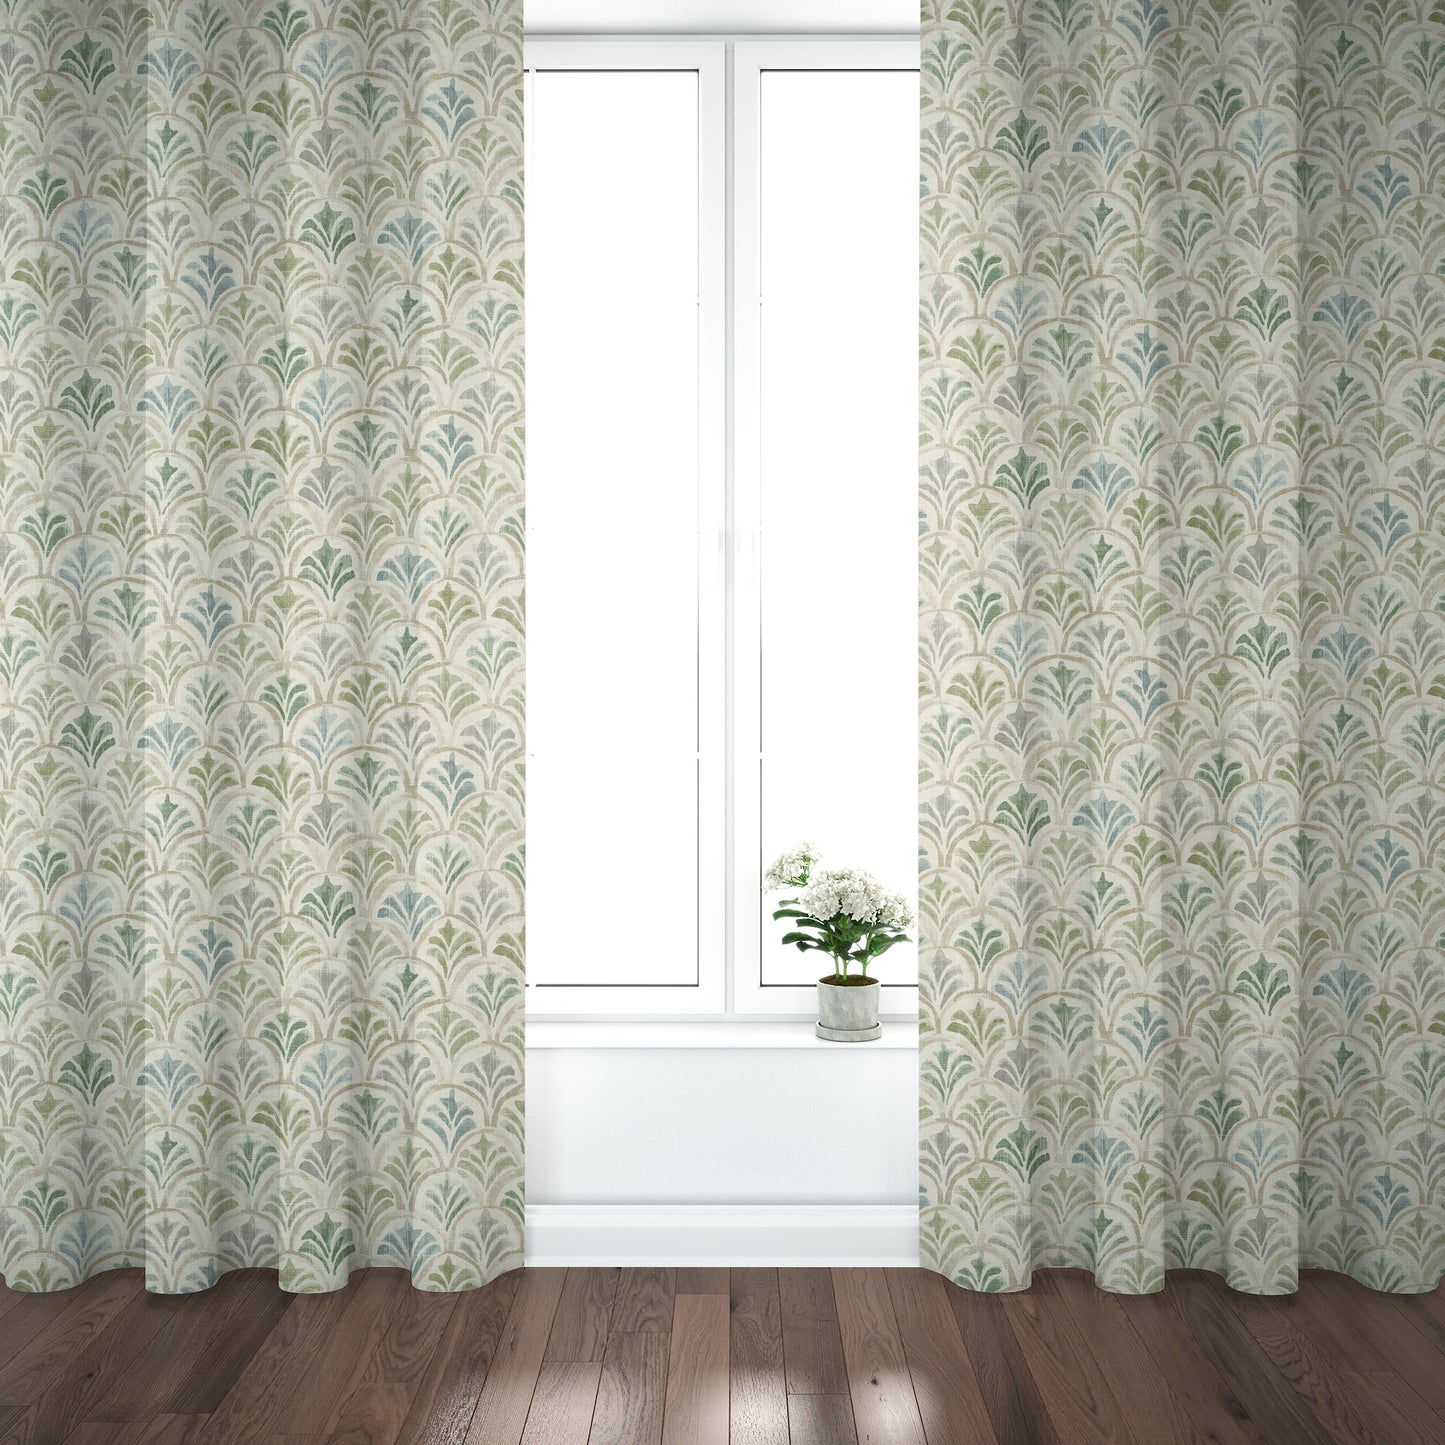 Pinch Pleated Curtain Panels Pair in Countess Bay Green Scallop Watercolor